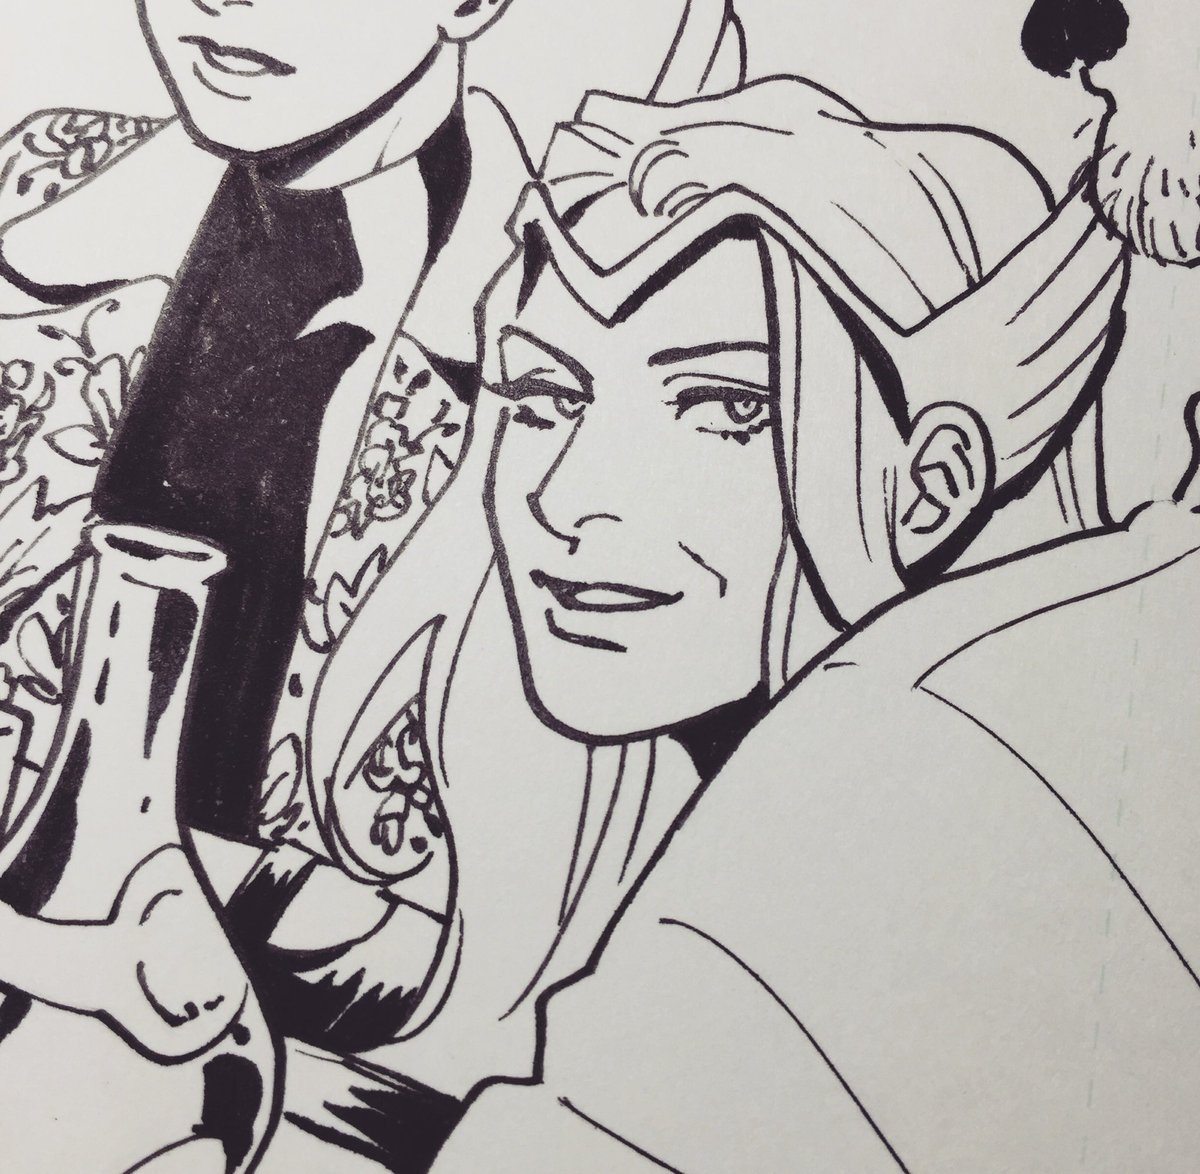 Favorite thing inked today! 